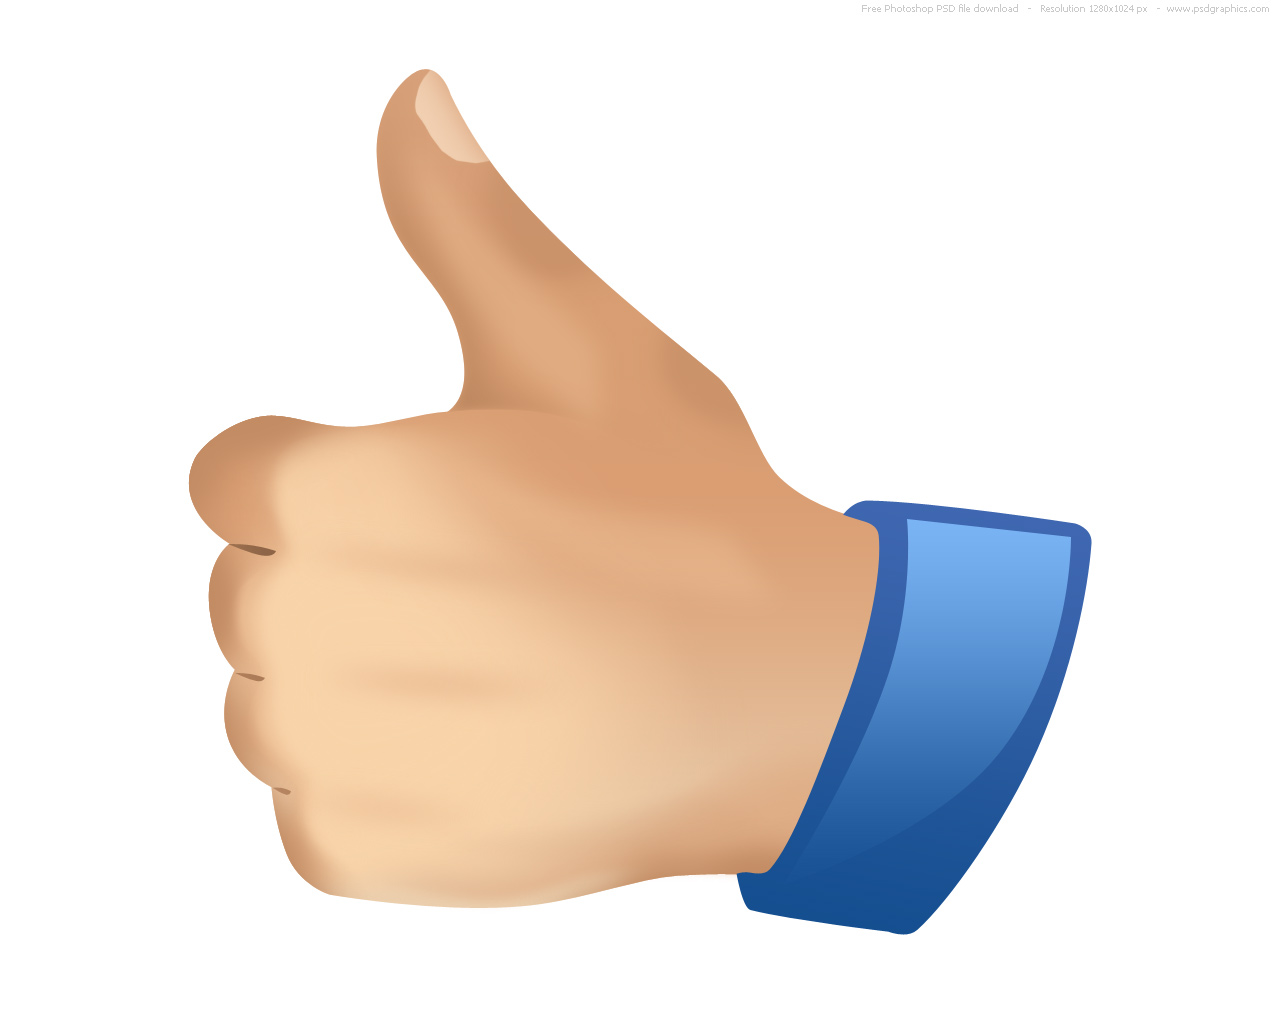 Thumbs Up Image - ClipArt Best